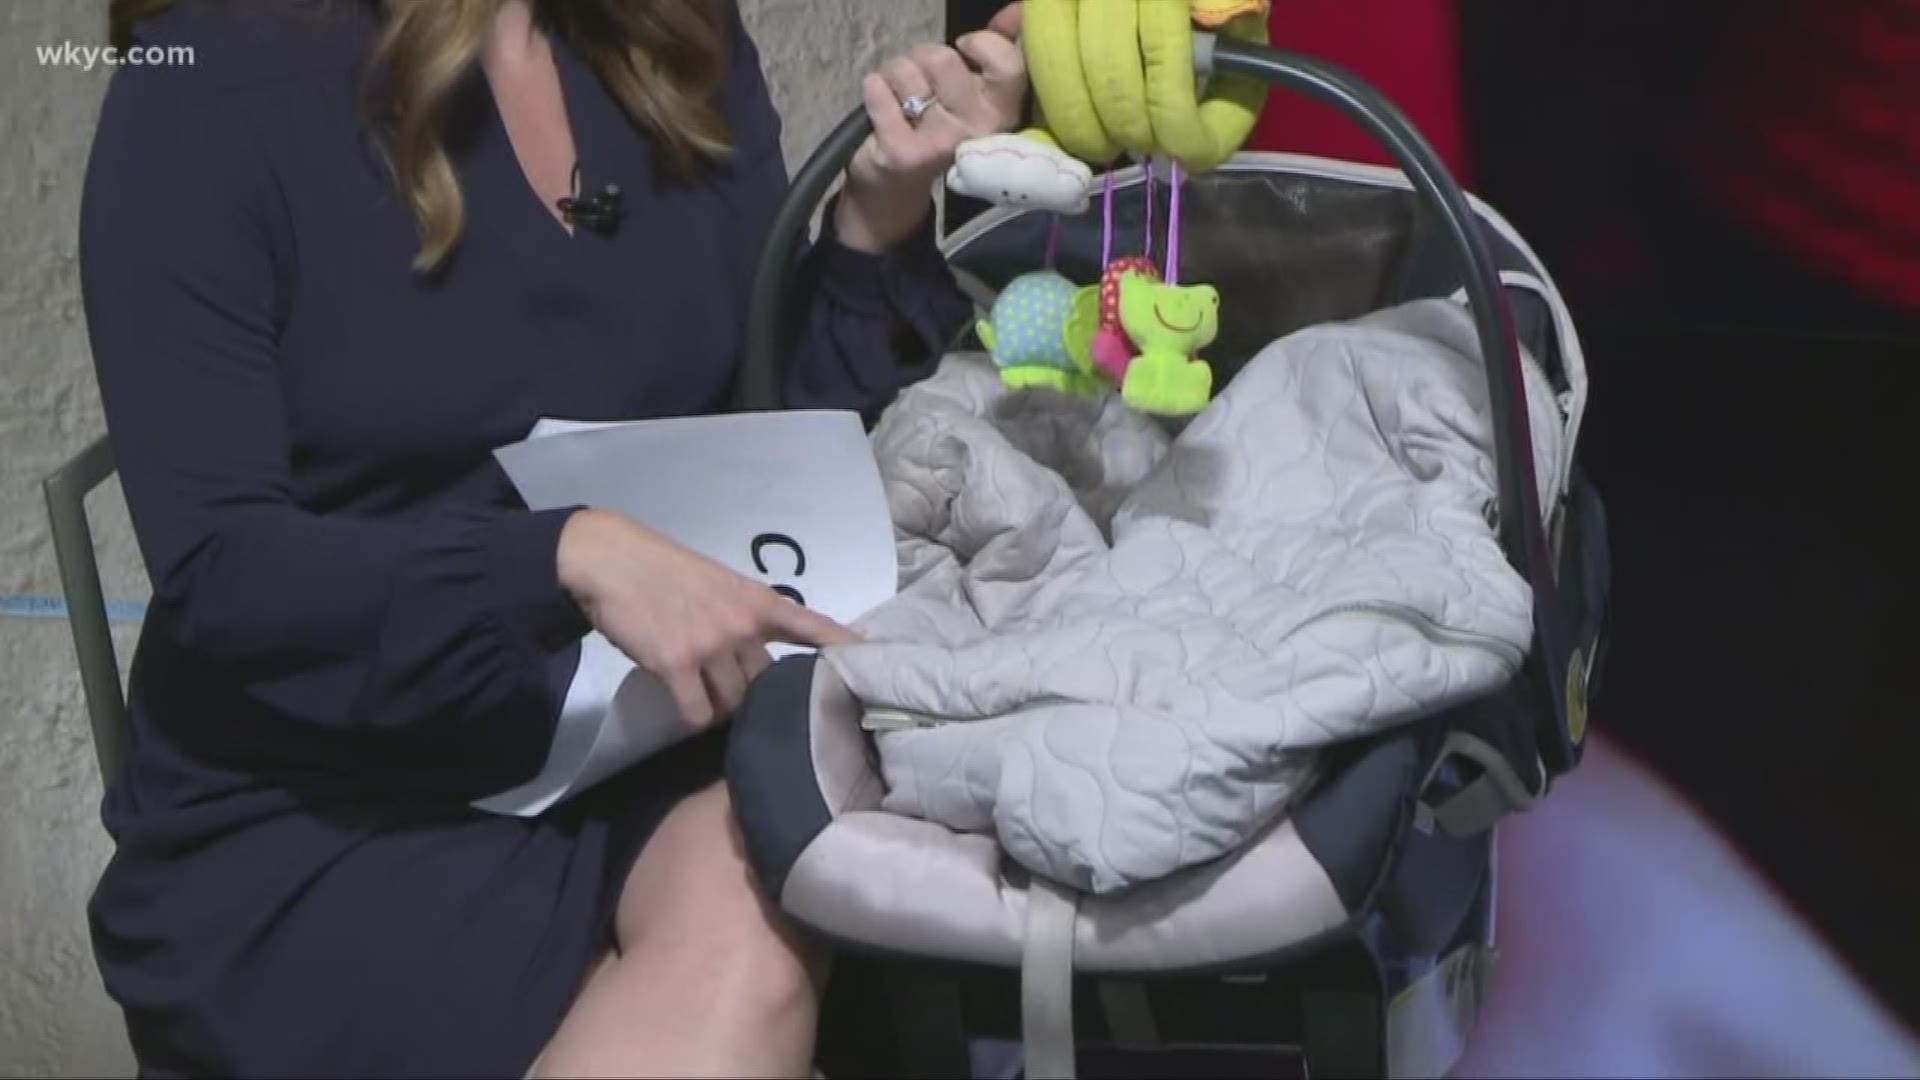 Dec. 7, 2018: A panel of moms discuss the truth behind keeping your children safe in their car seats.